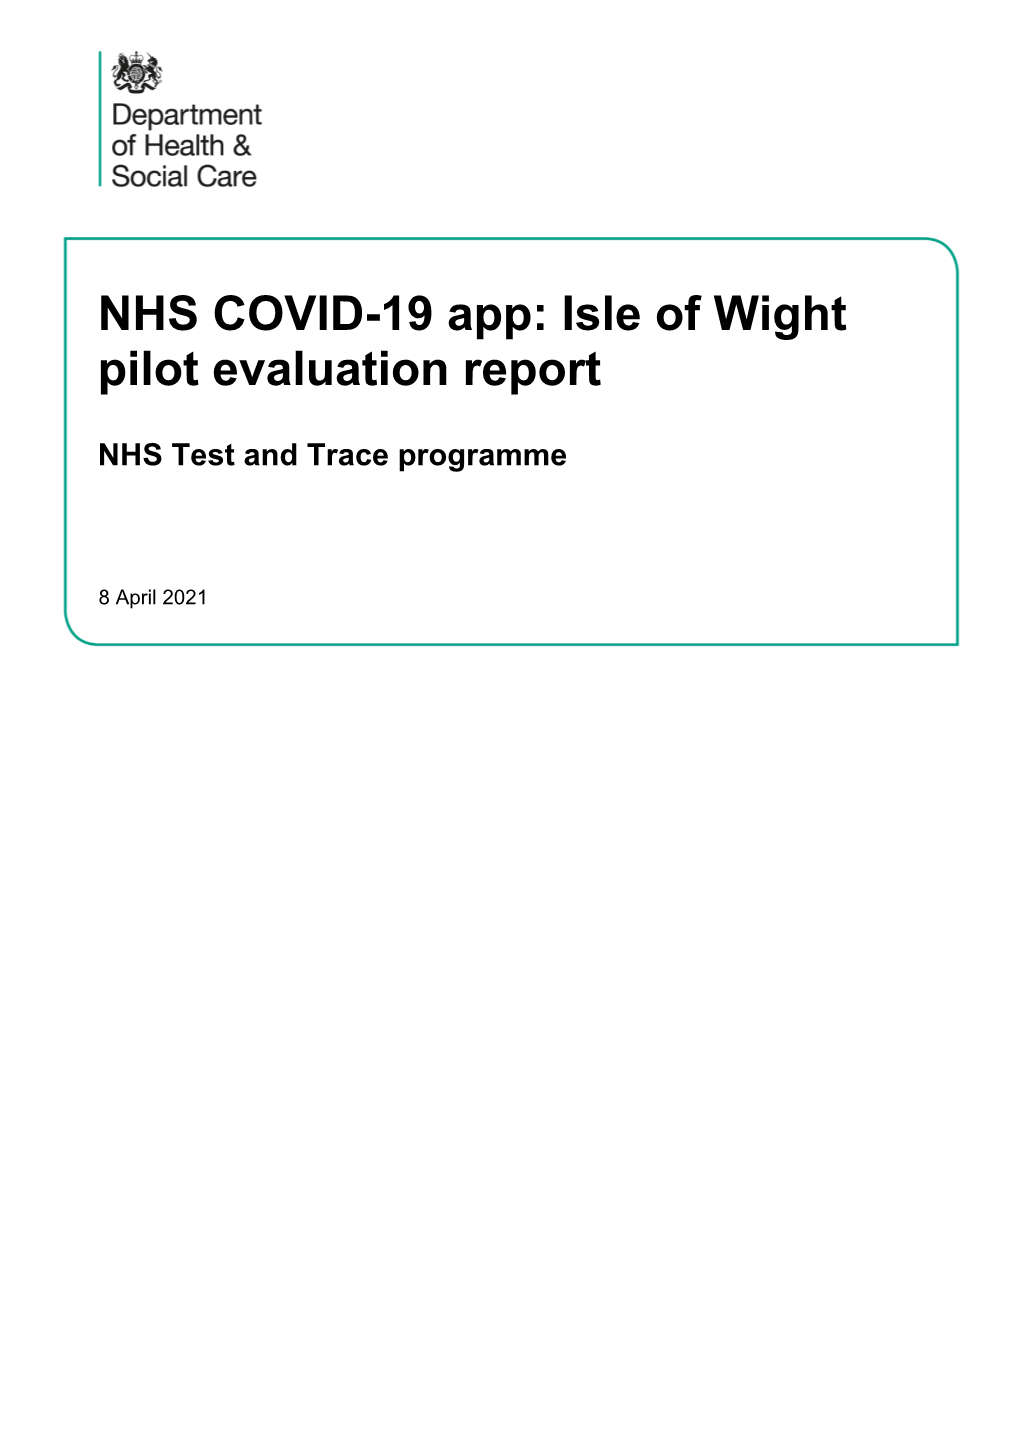 NHS COVID-19 App: Isle of Wight Pilot Evaluation Report